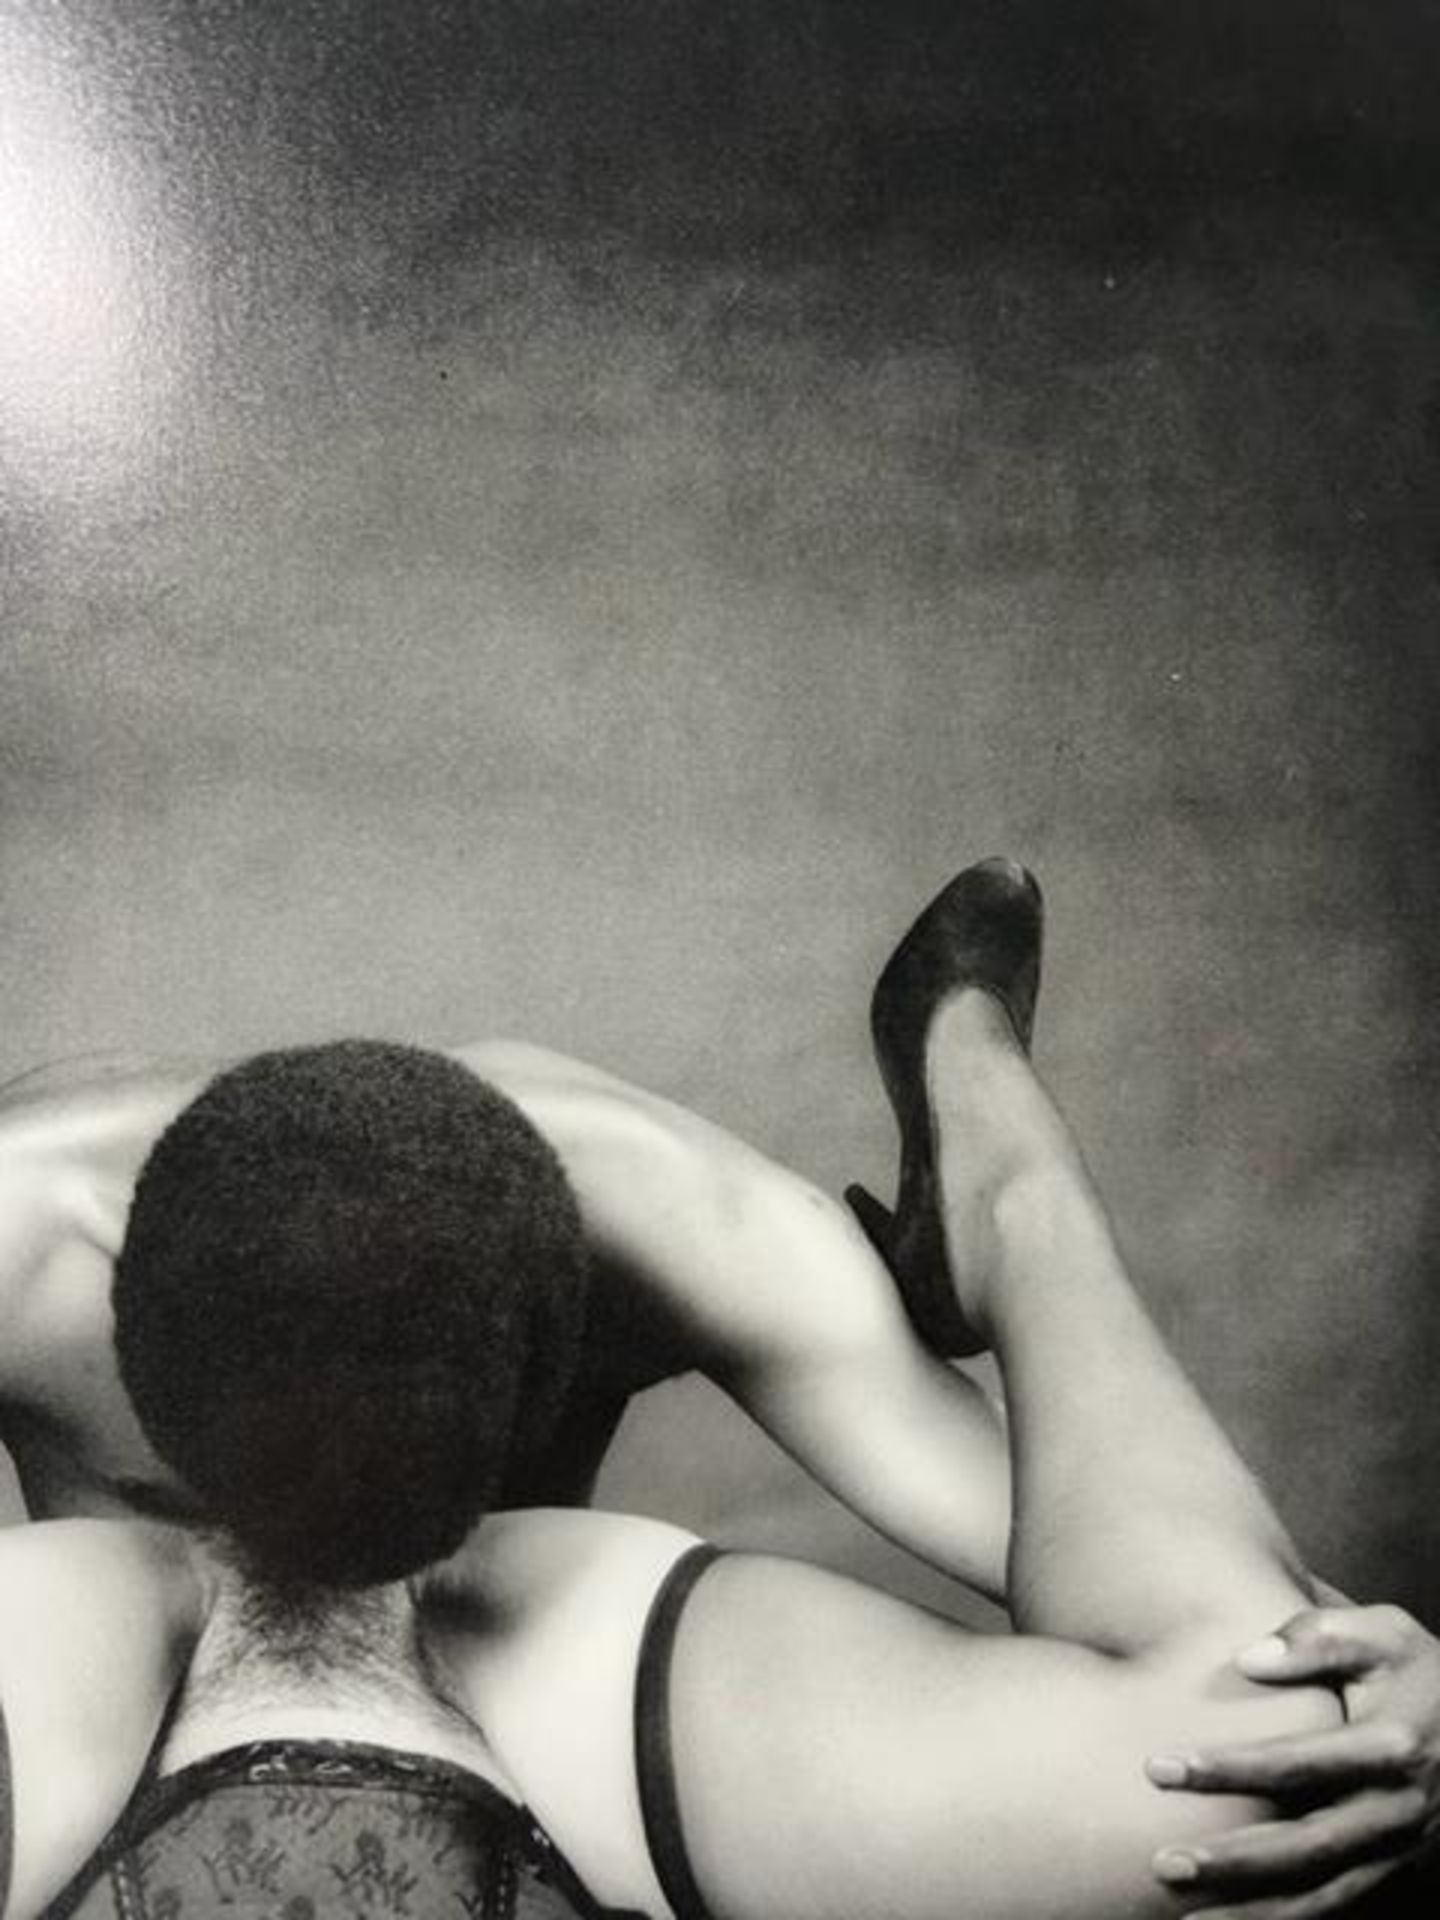 Robert Mapplethorpe "Marty and Veronica" Print. - Image 2 of 6